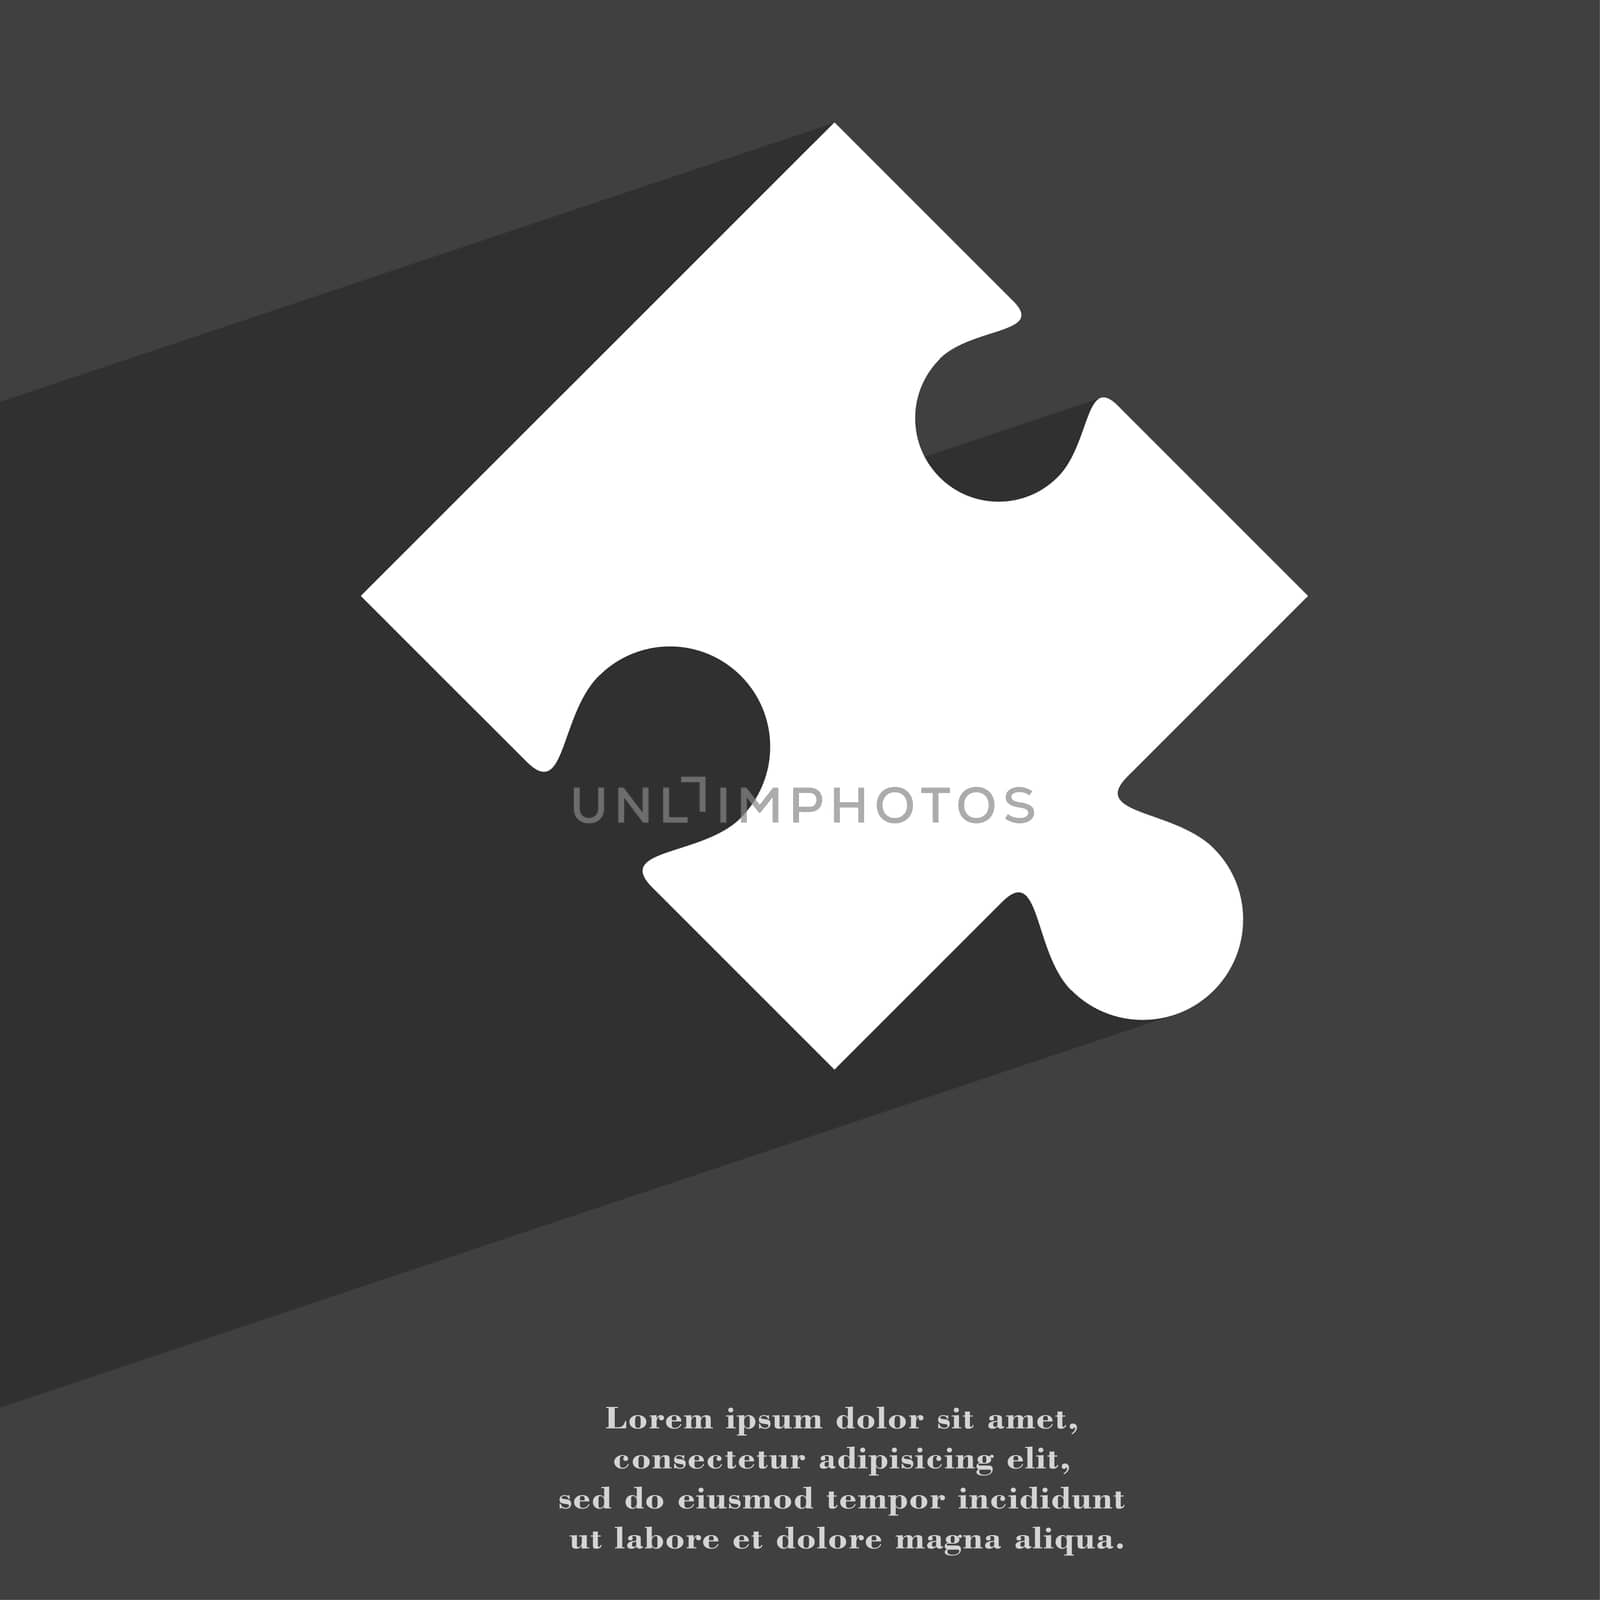 Puzzle piece icon symbol Flat modern web design with long shadow and space for your text. illustration